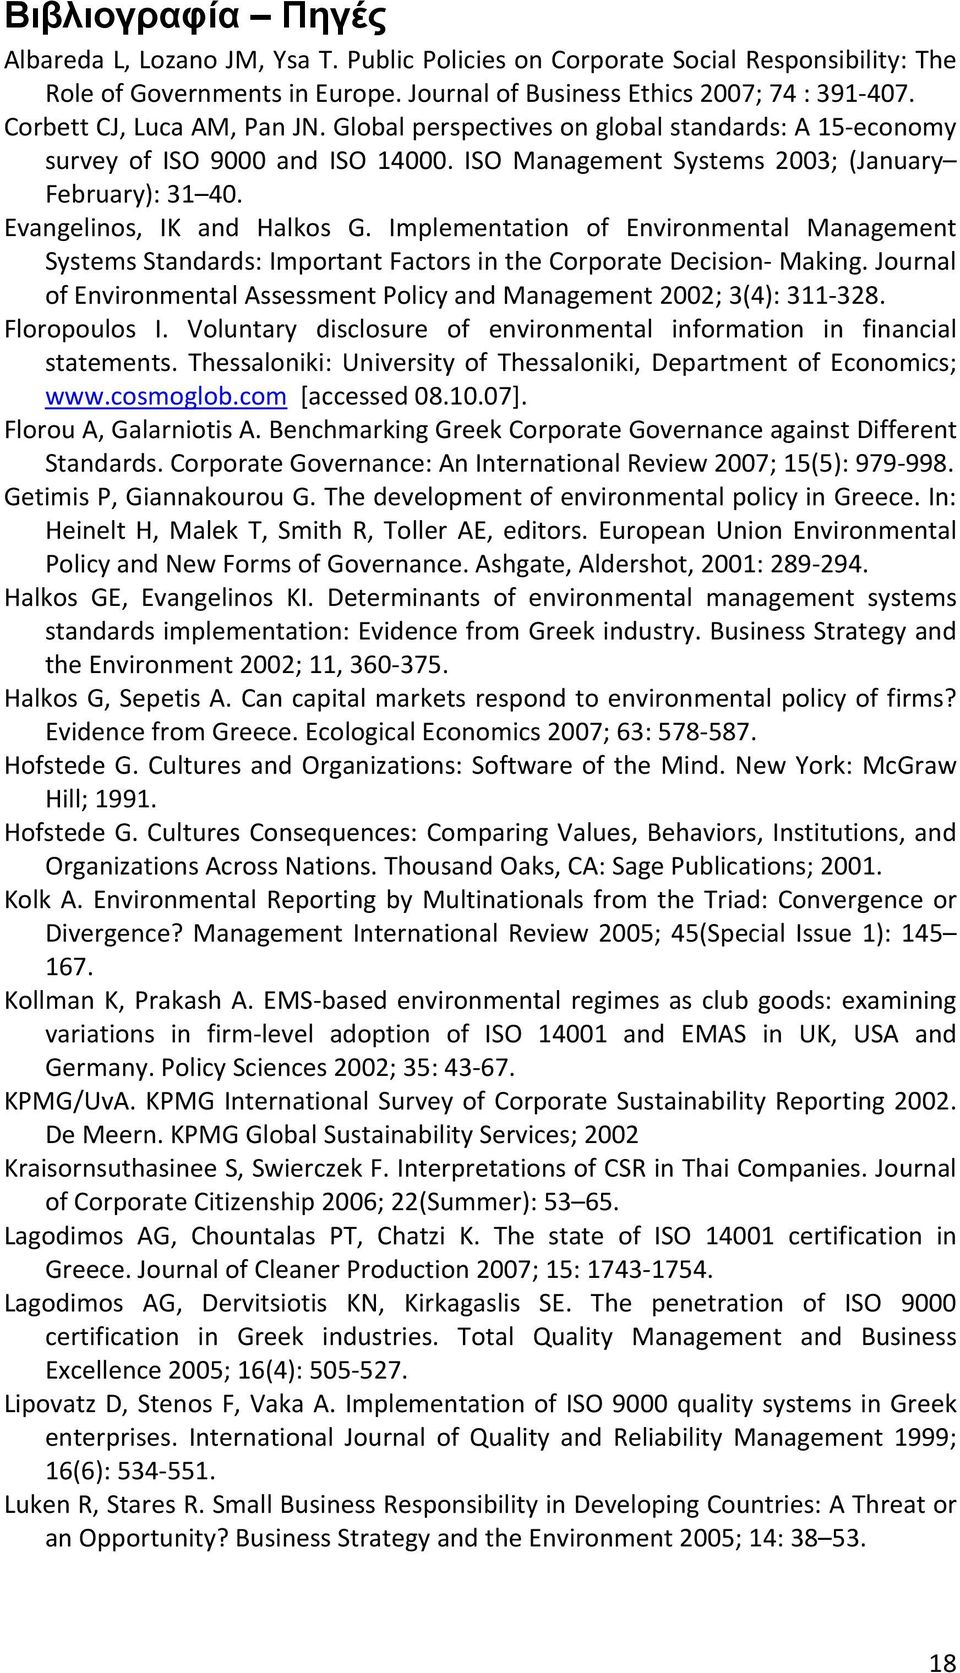 Evangelinos, IK and Halkos G. Implementation of Environmental Management Systems Standards: Important Factors in the Corporate Decision Making.